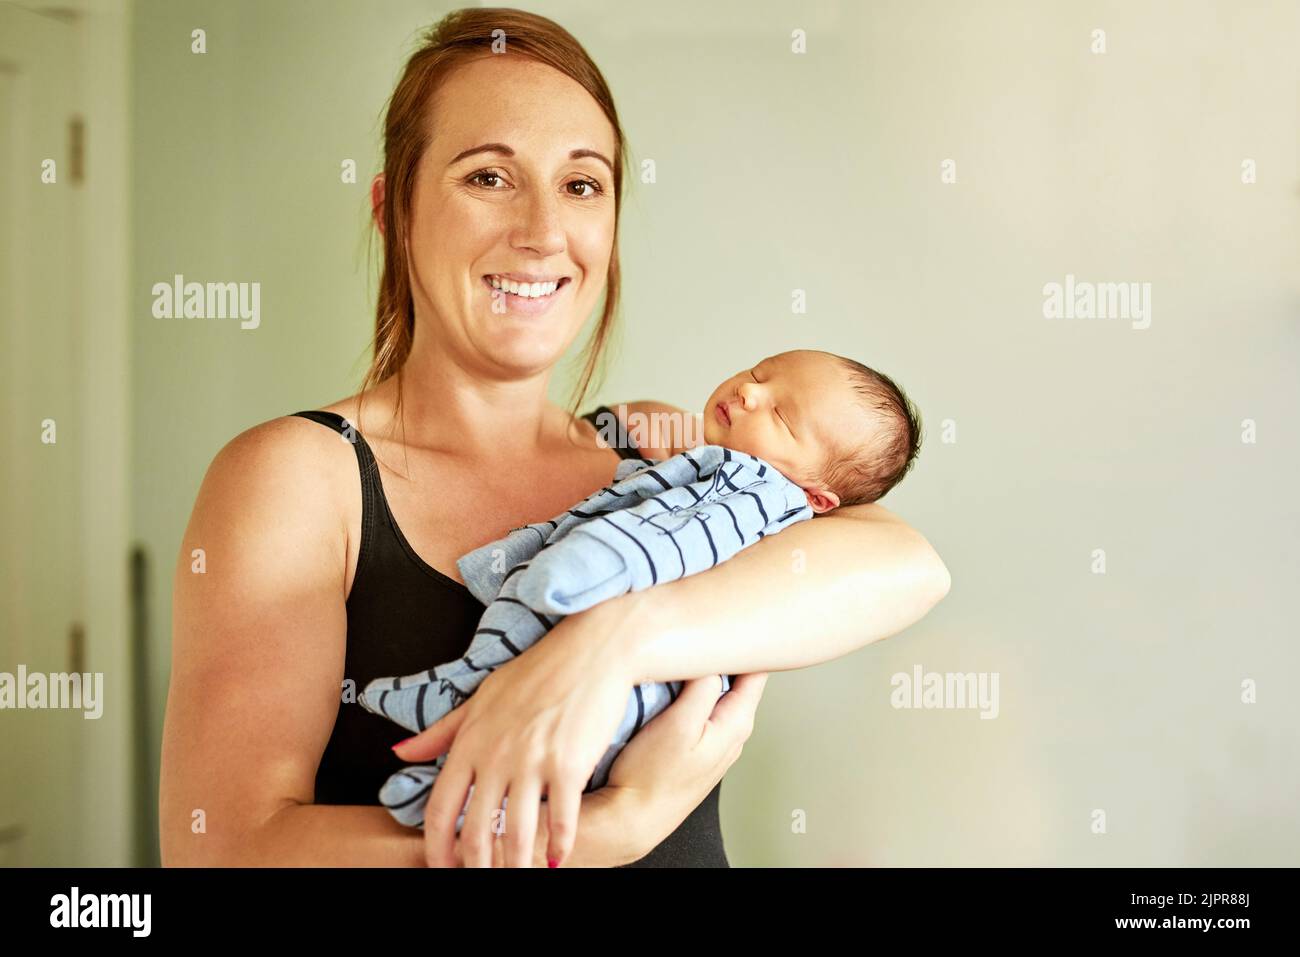 Shhh hes asleep. Portrait of cheerful young mother holding her infant son while looking into the camera at home. Stock Photo